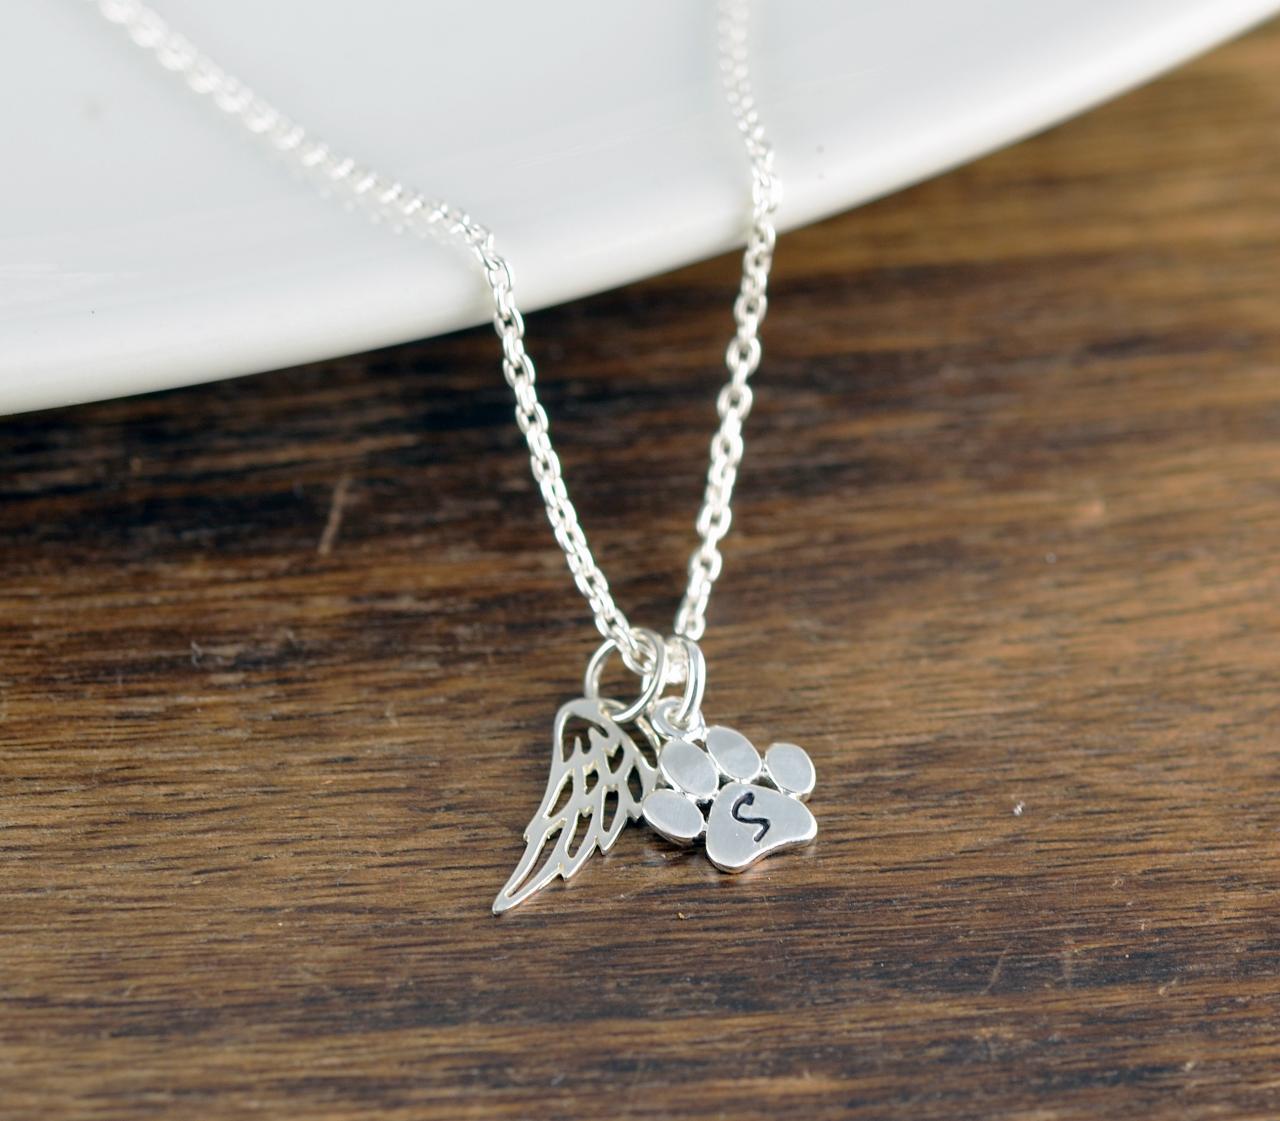 Silver Dog Paw Necklace, Pet Memorial Jewelry, Dog Paw Charm Necklace, Dog Lover Necklace, Dog Lover Gift, Animal Lover Gift, Dog Mom Gift